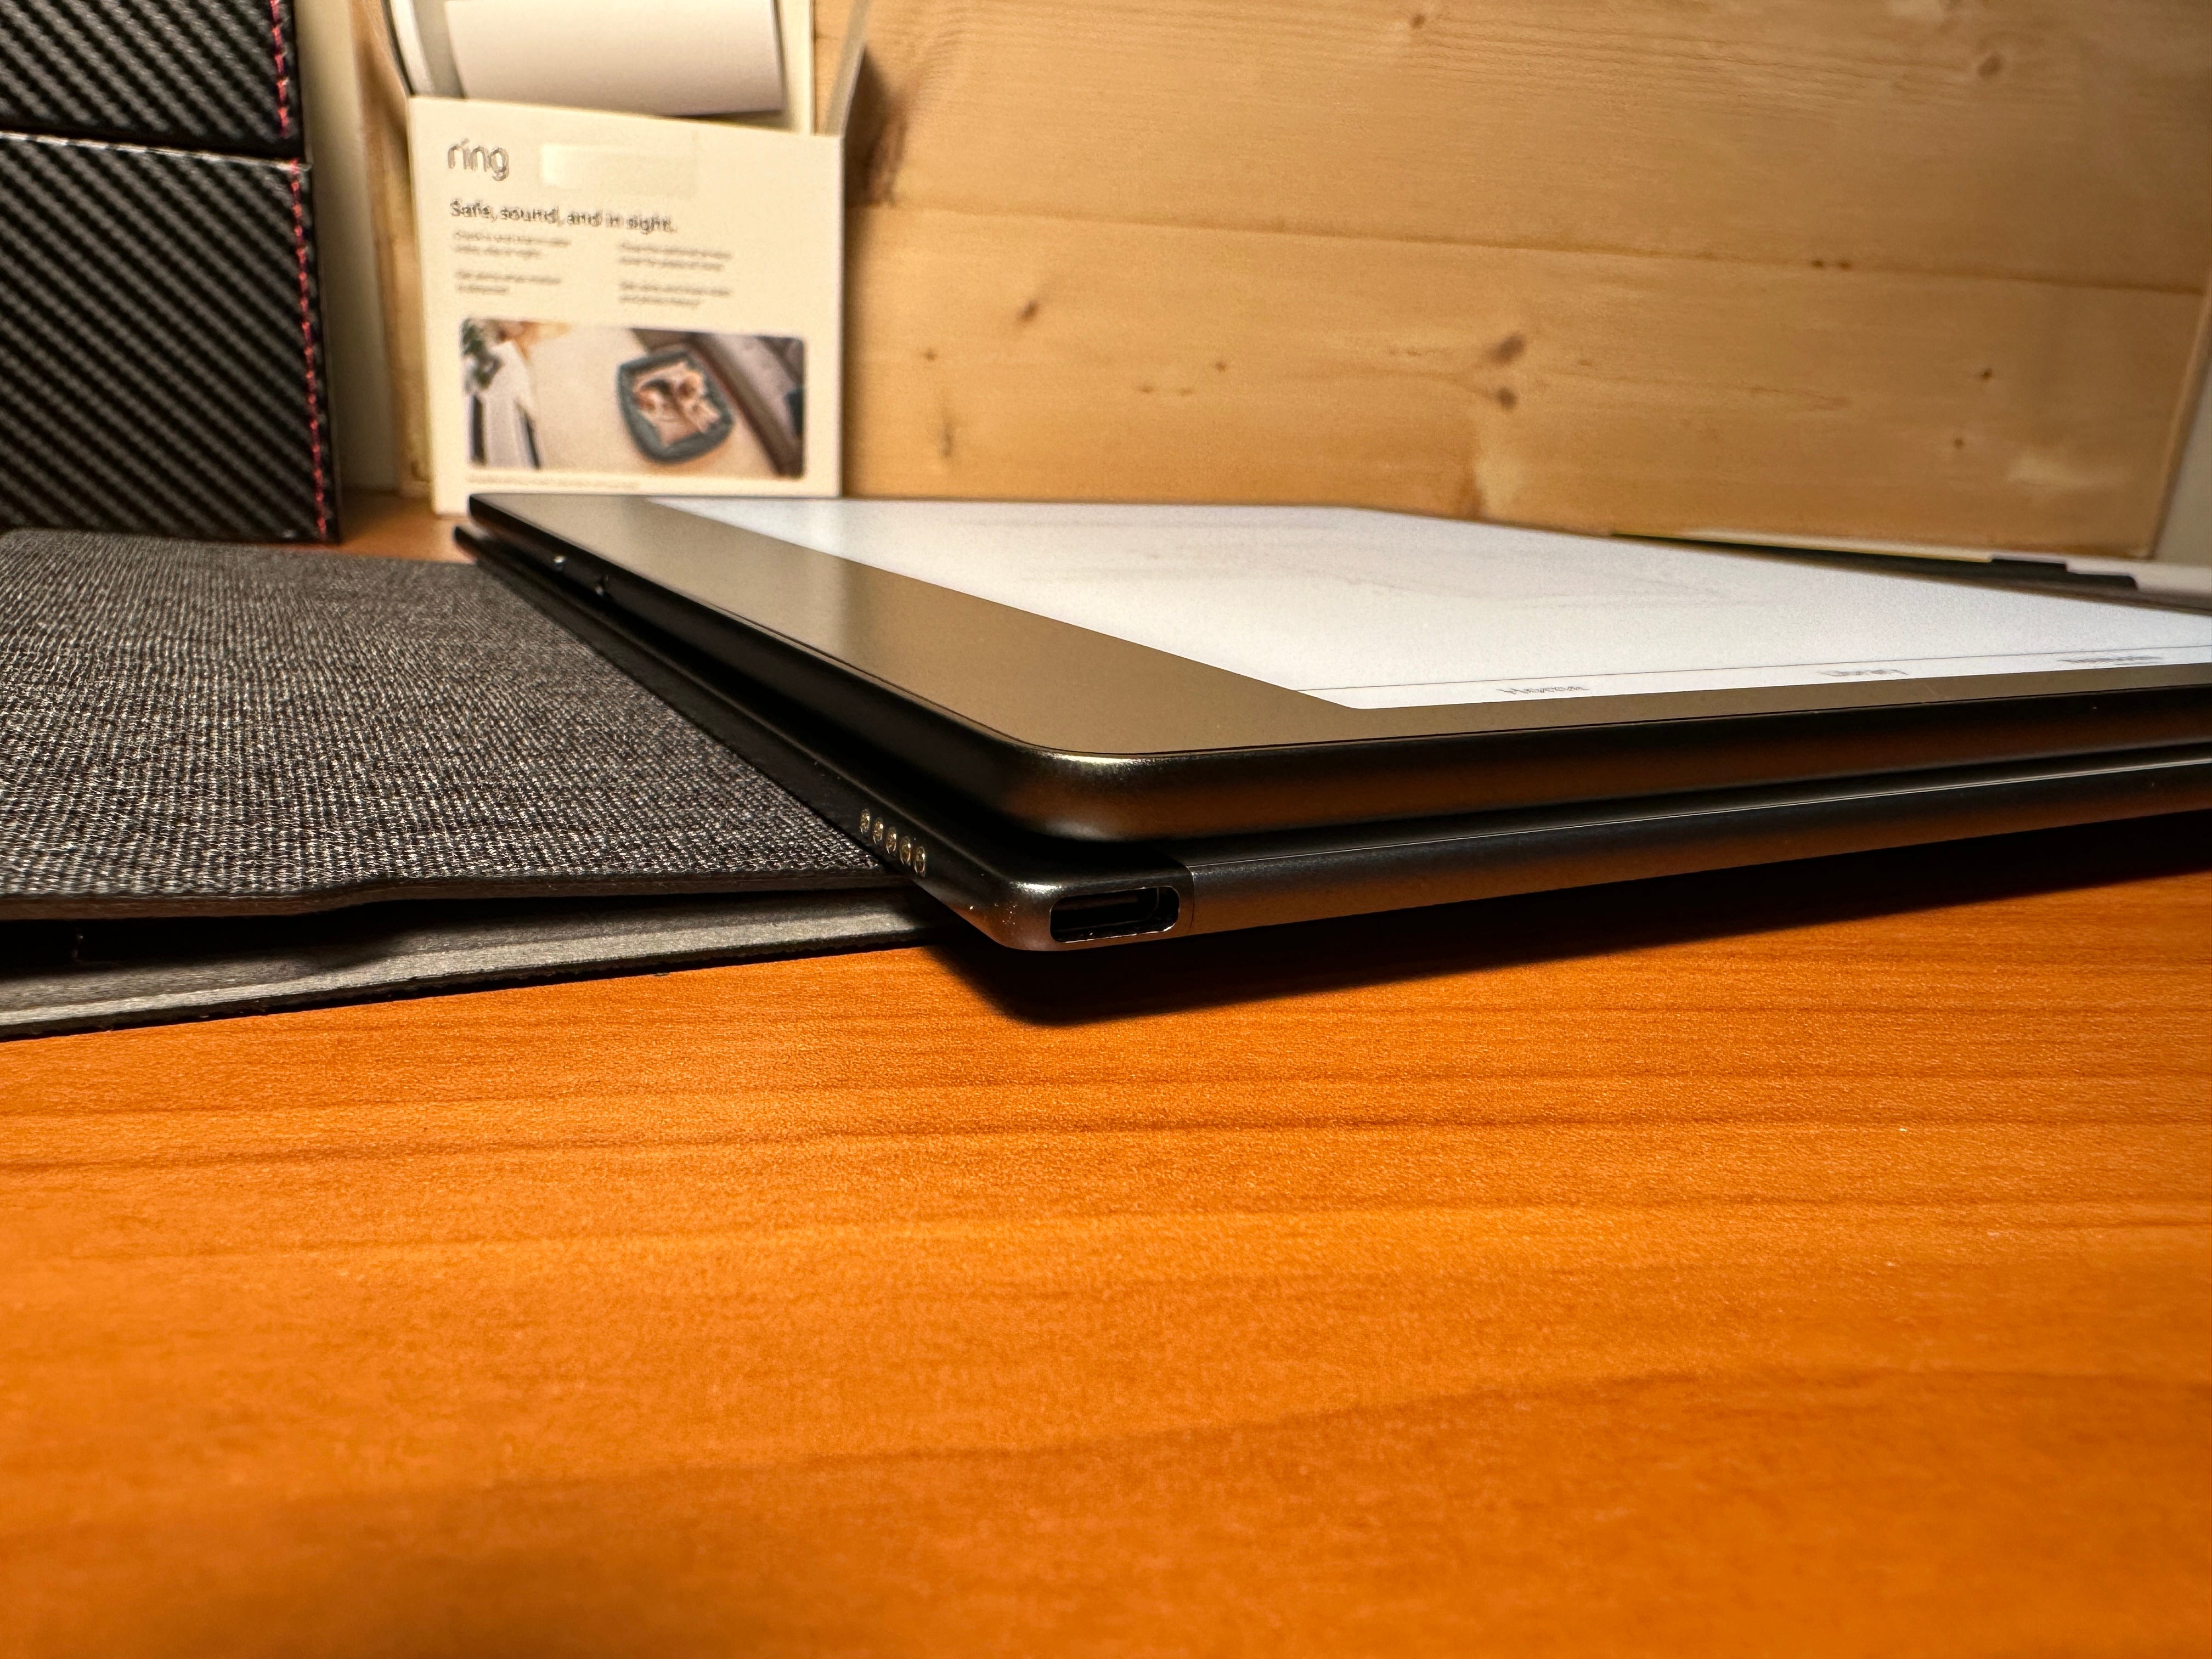 Remarkable 2 Tablet Vs.  Kindle Scribe - Forbes Vetted